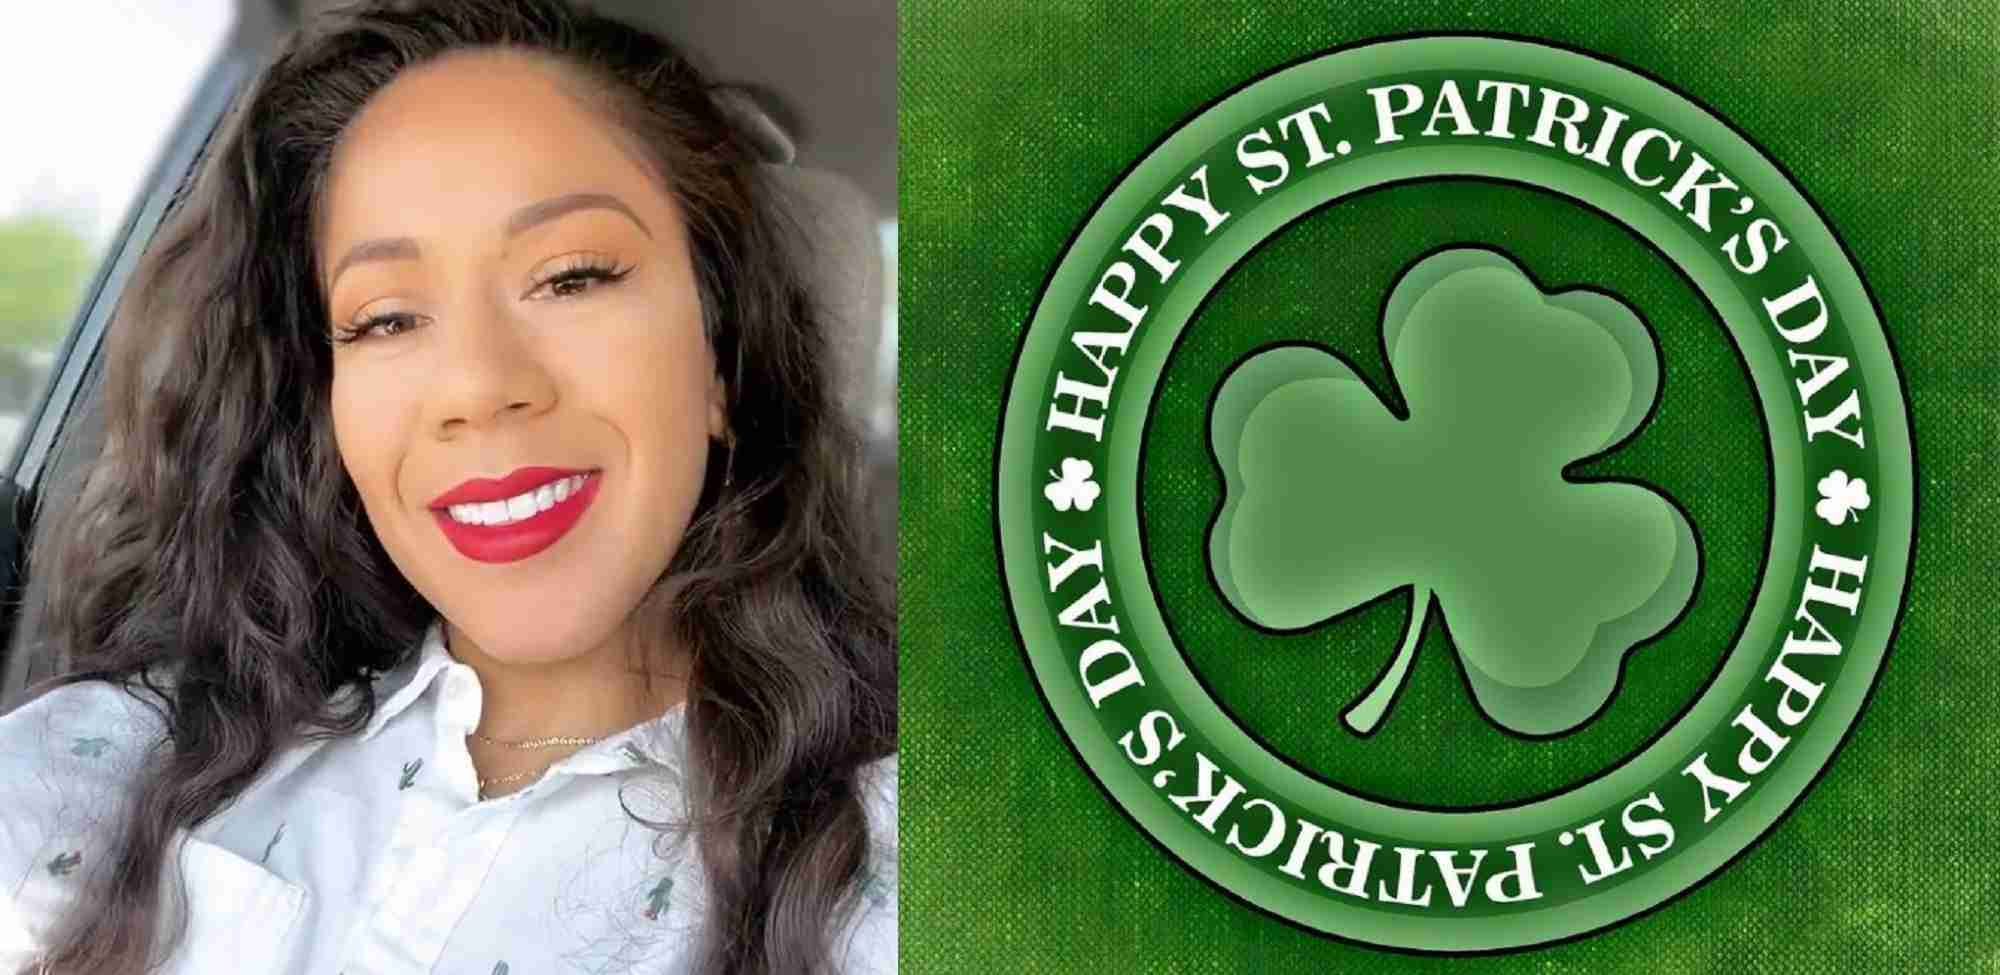 Hermosillo Boxing Beauty Grabs Attention Ahead Of St. Patrick's Day Fight Weekend